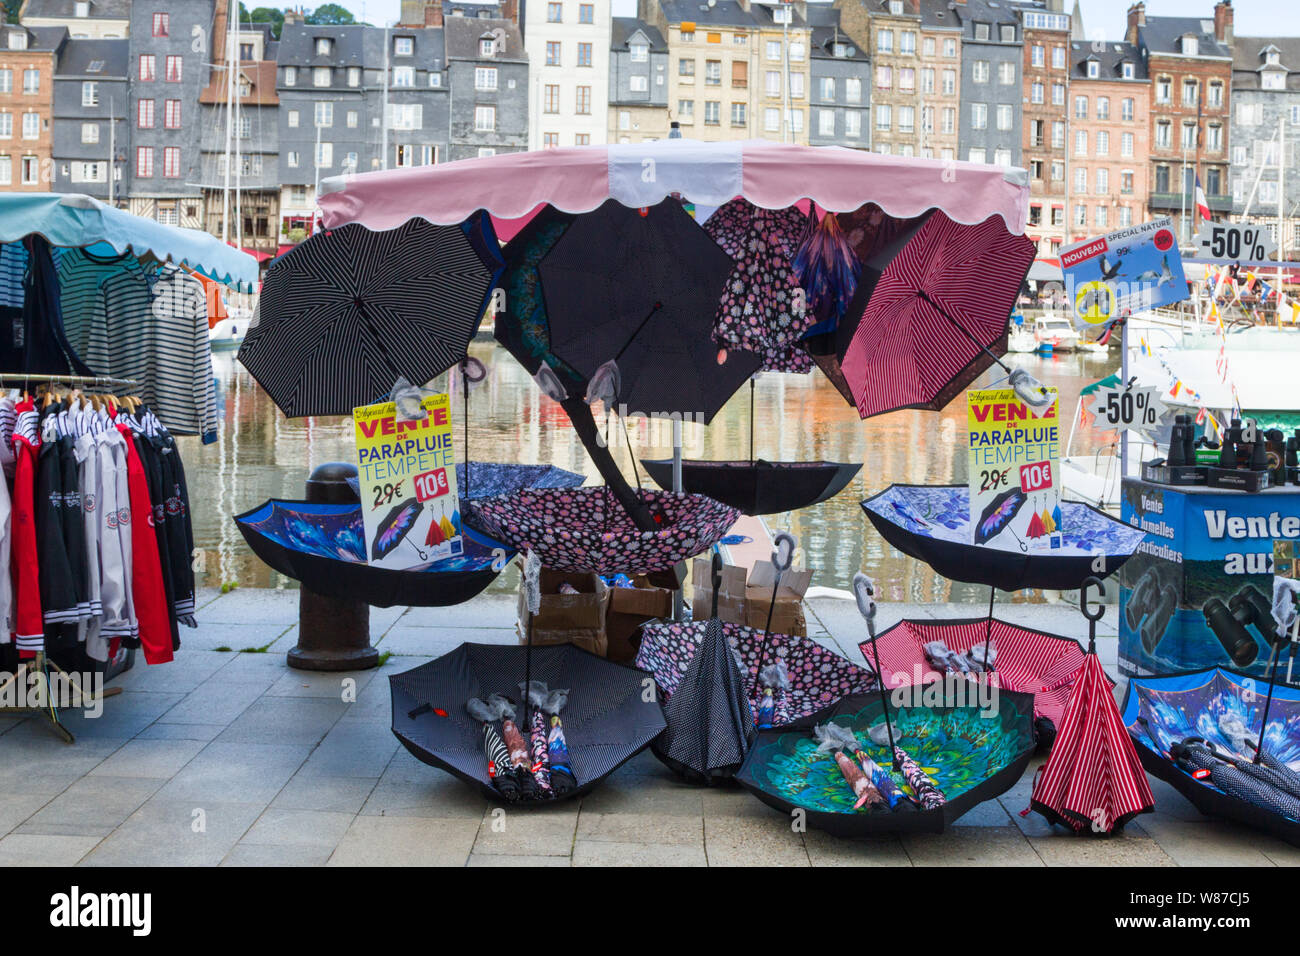 A colourful stall selling umbrellas by the old harbour at the Saturday market in Honfleur, Normandy, France Stock Photo